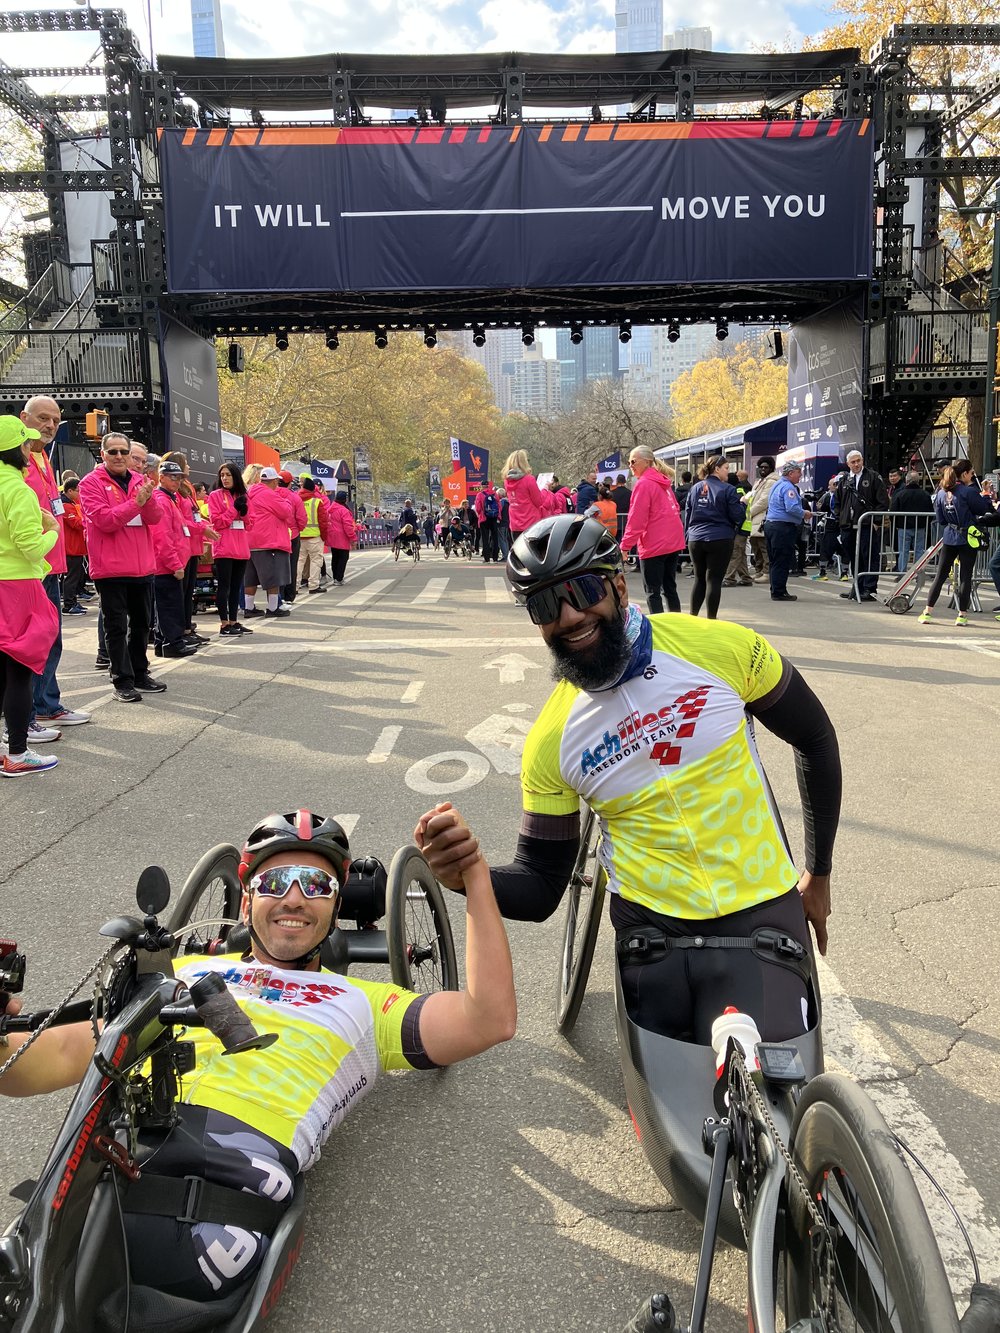  Achilles Freedom Team athletes holding hands and posing together at the NYC Marathon finish line 